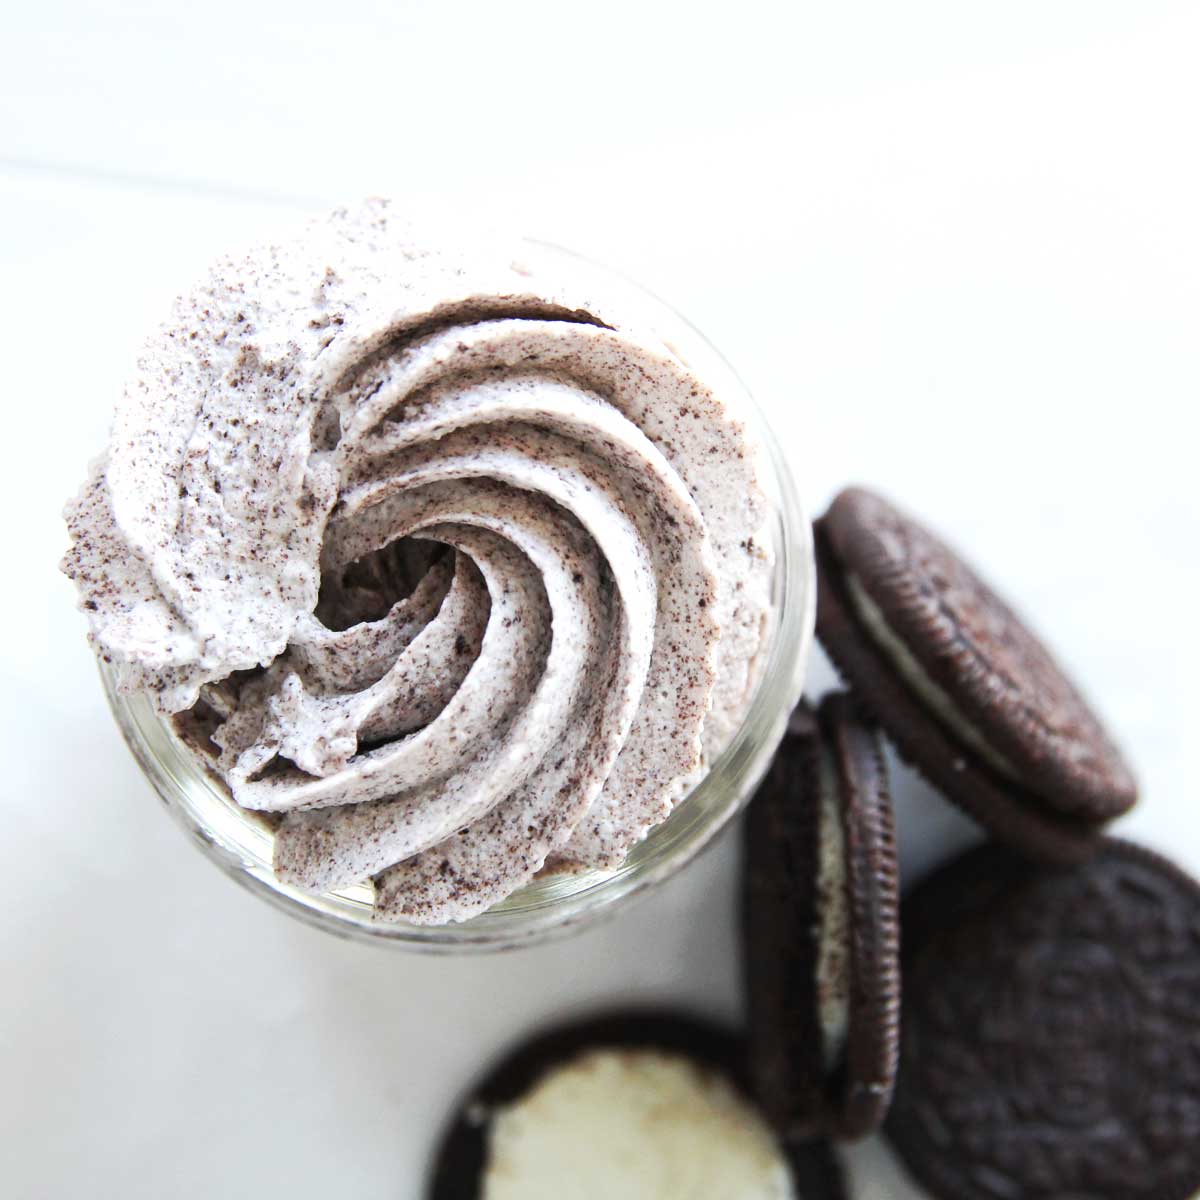 Easy Oreo Whipped Cream Recipe For Any Dessert Frosting - Whipped Cream Recipes